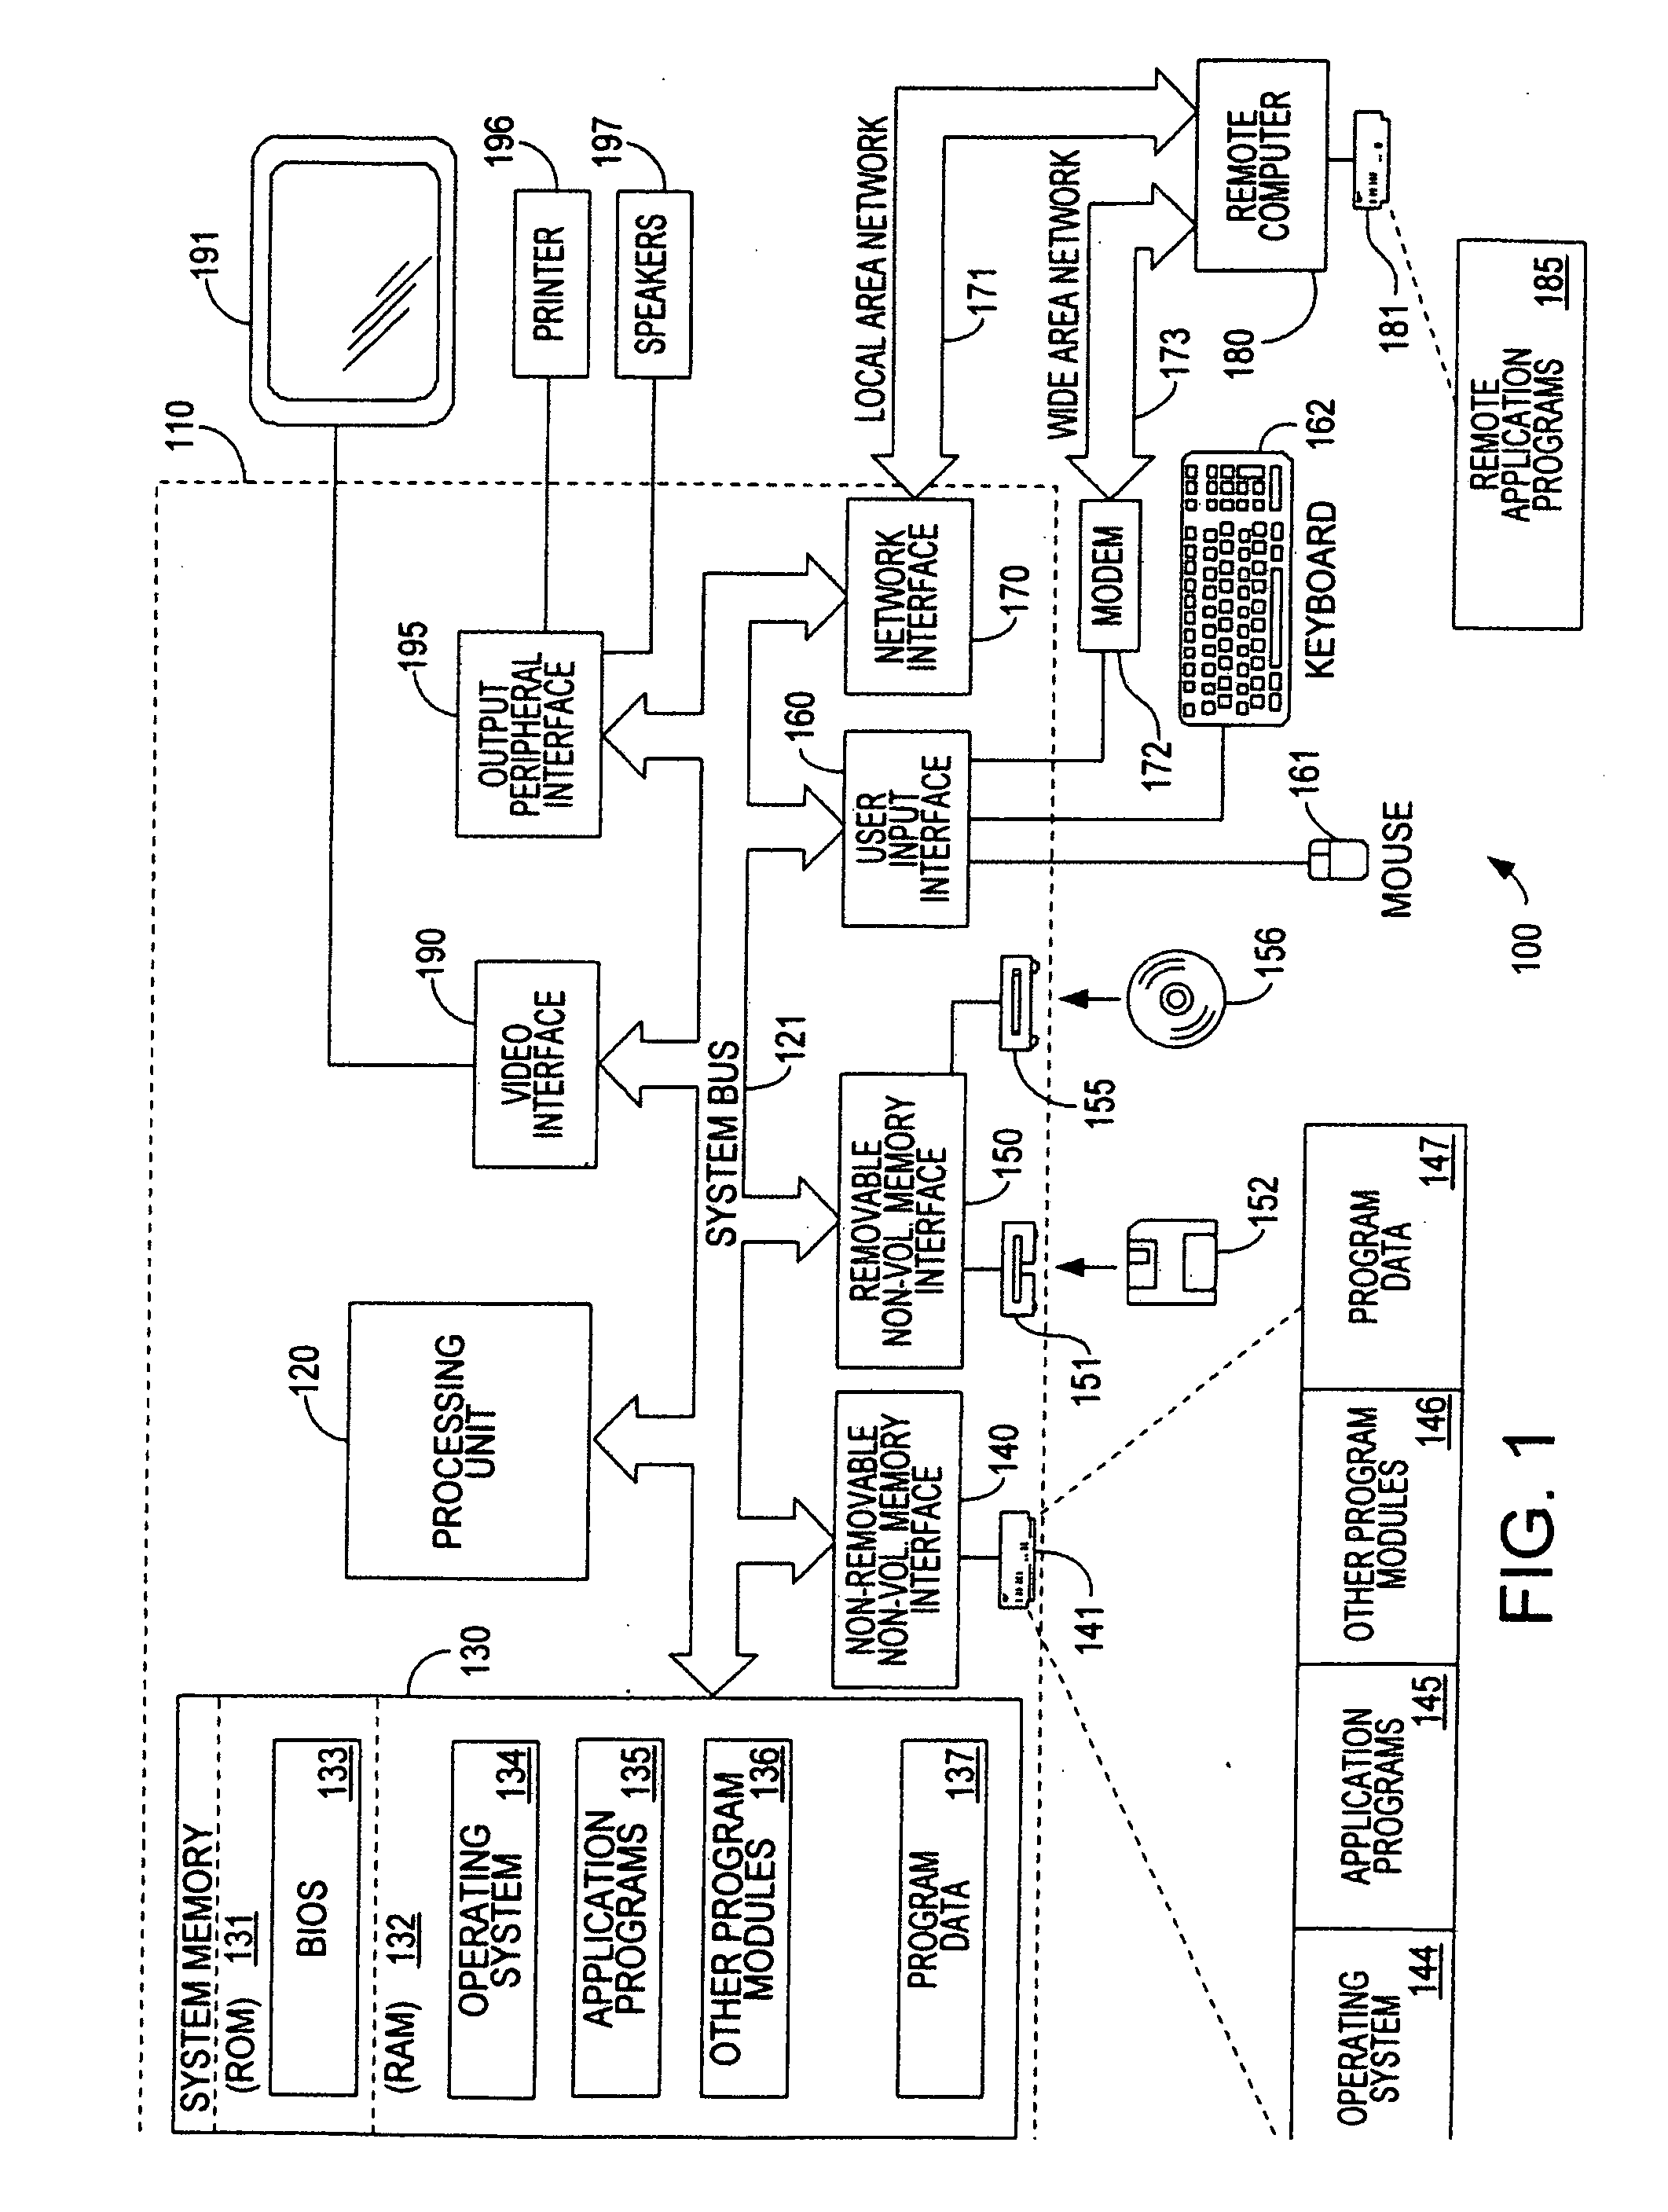 Peer-to-peer name resolution protocol (PNRP) and multilevel cache for use therewith